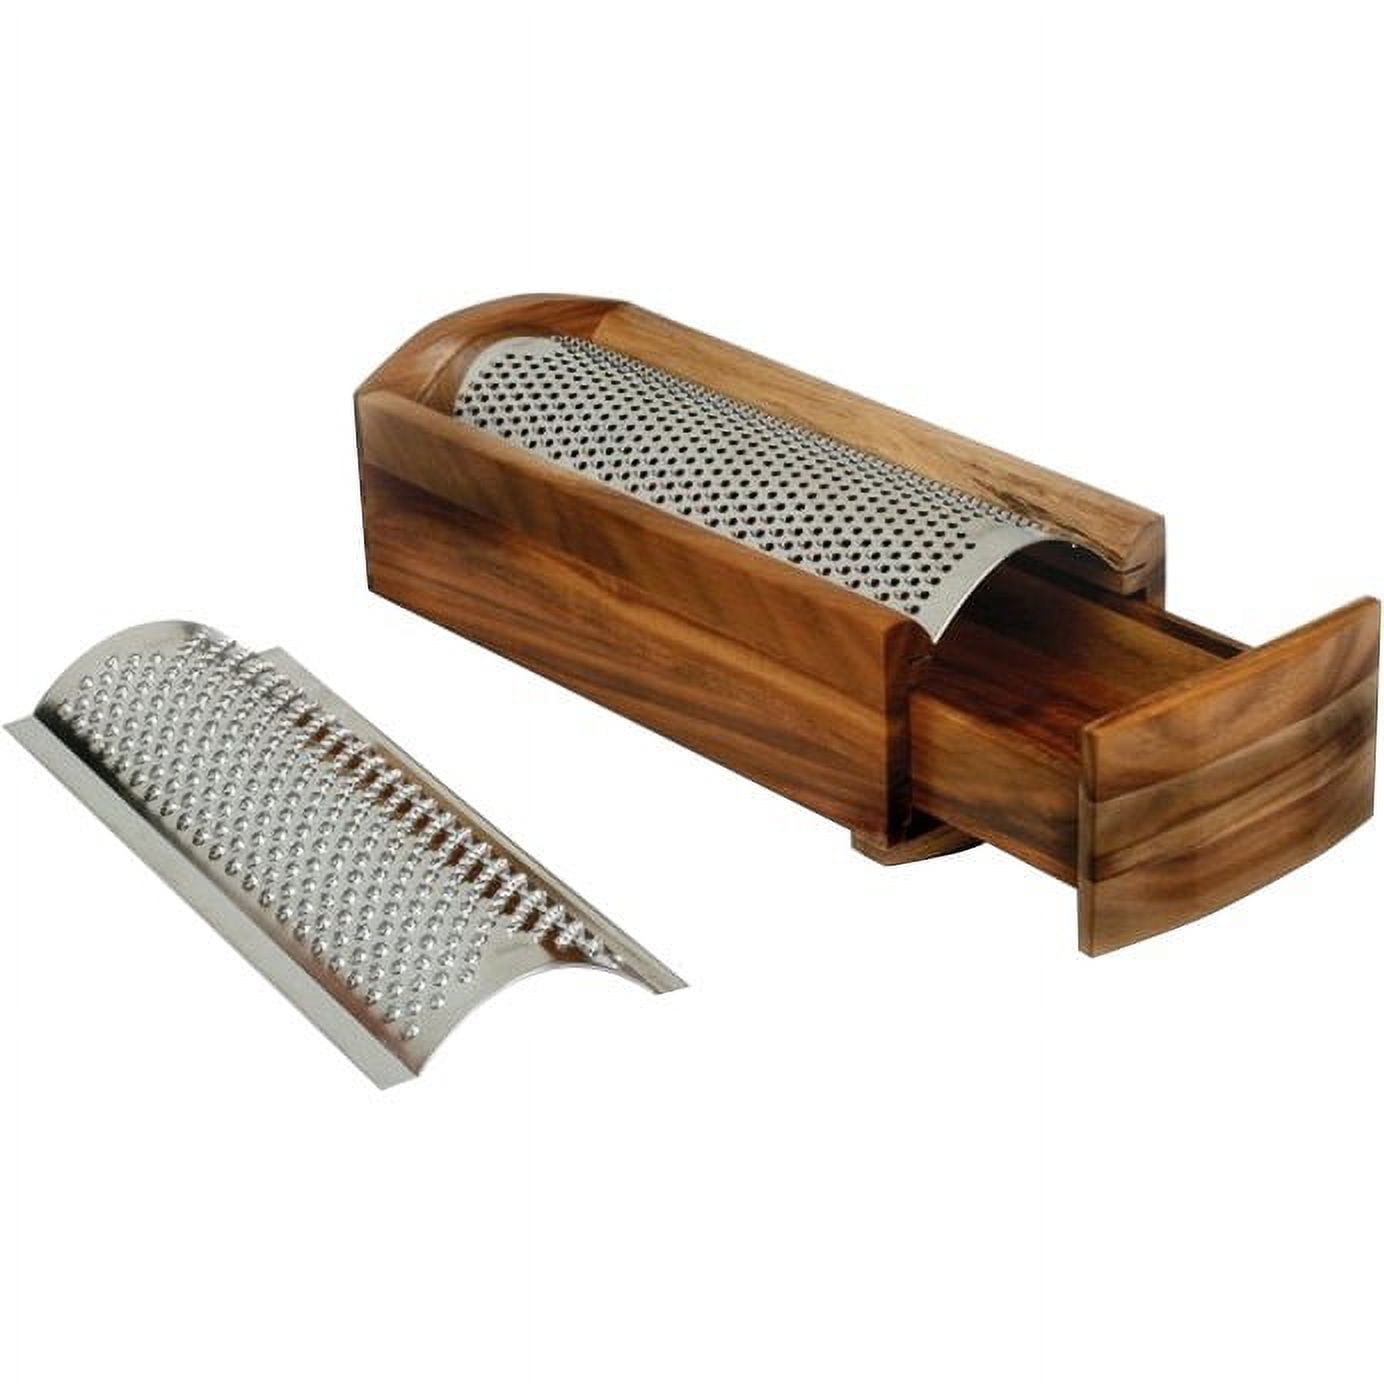 Stainless steel cheese grater, acacia wood cheese grater box, cheese  eraser, shredder, kitchen tool - AliExpress